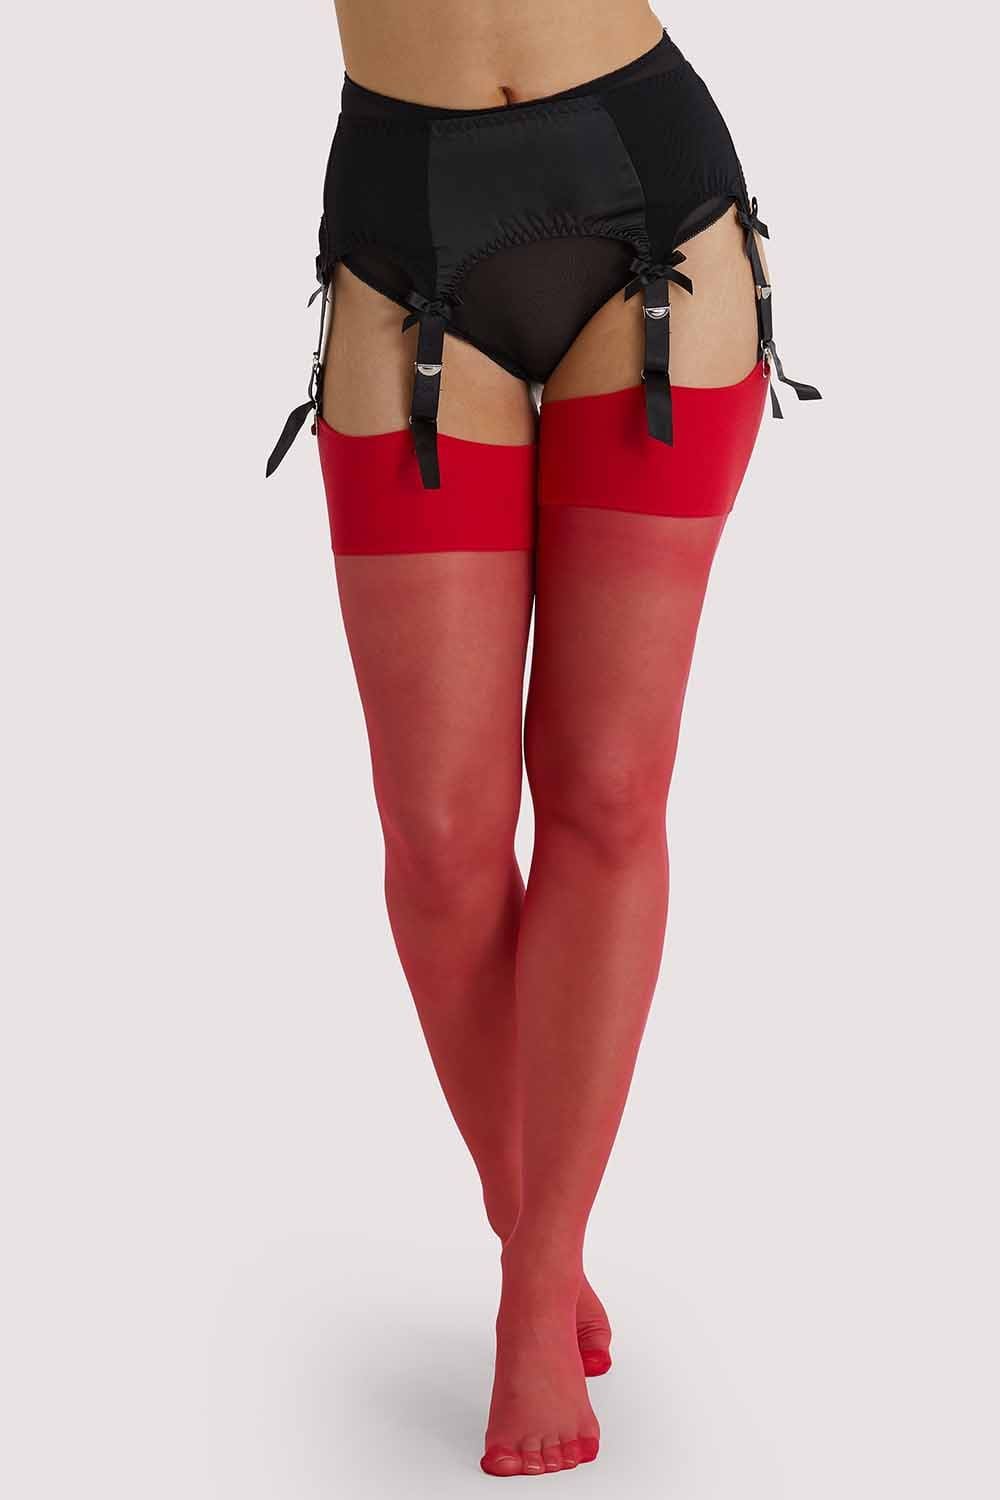 Seamed Stockings Red AUS 8 - 22 Tall